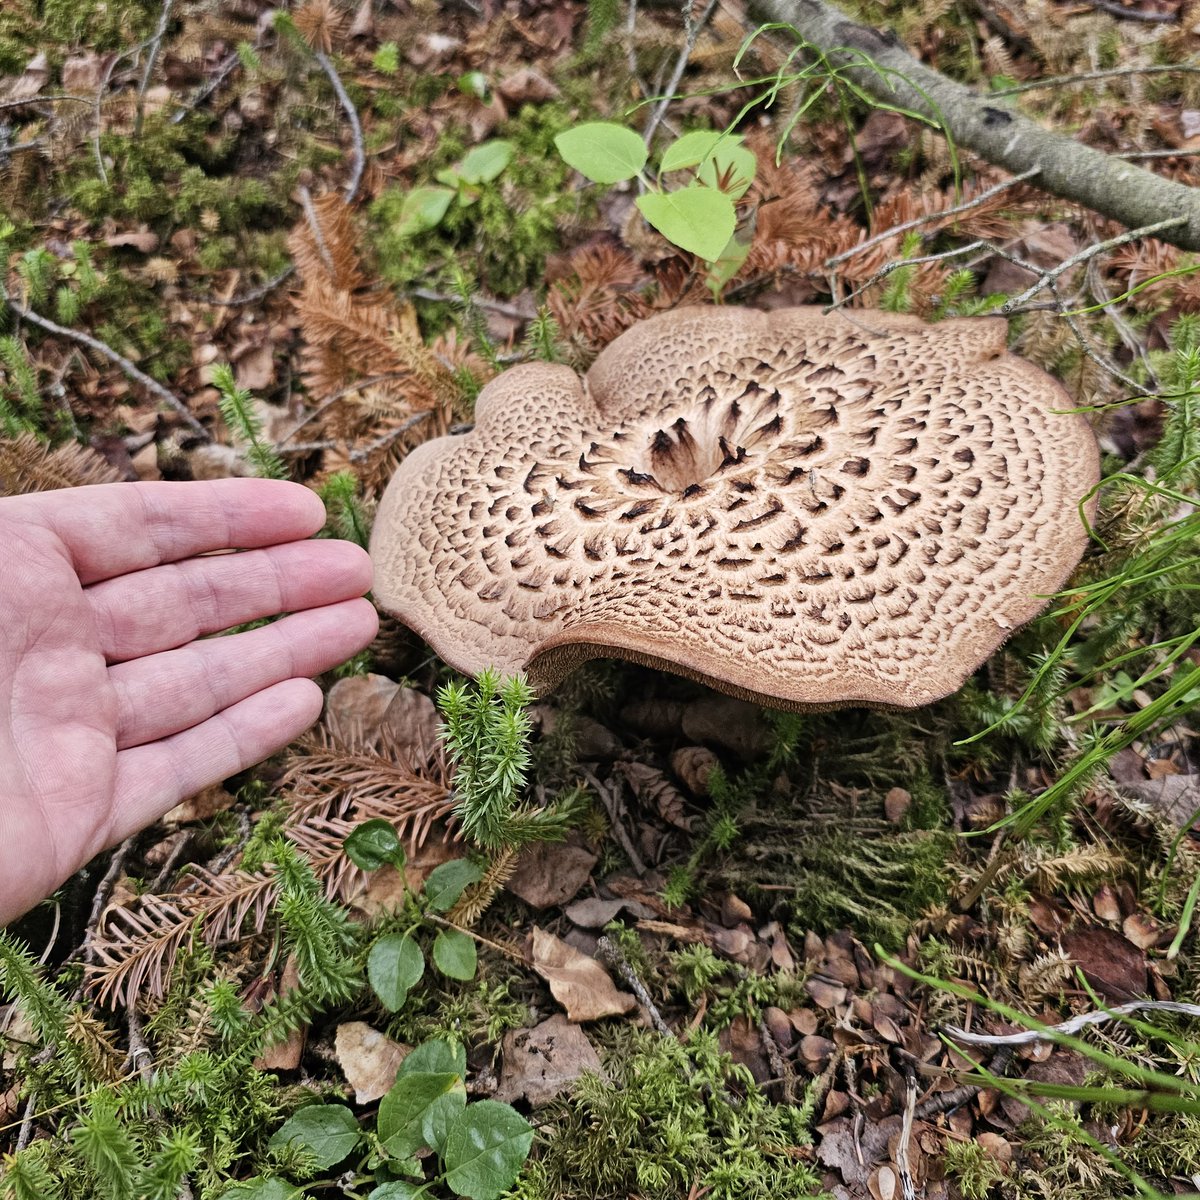 #mushroomoftheday is this amazing Shingled Hedgehog next to our #bcparks pitch by the edge of Kinaskan Lake. Is edible like our Hedgehog fungus, but not mine to pick. #NorthAmericanTour